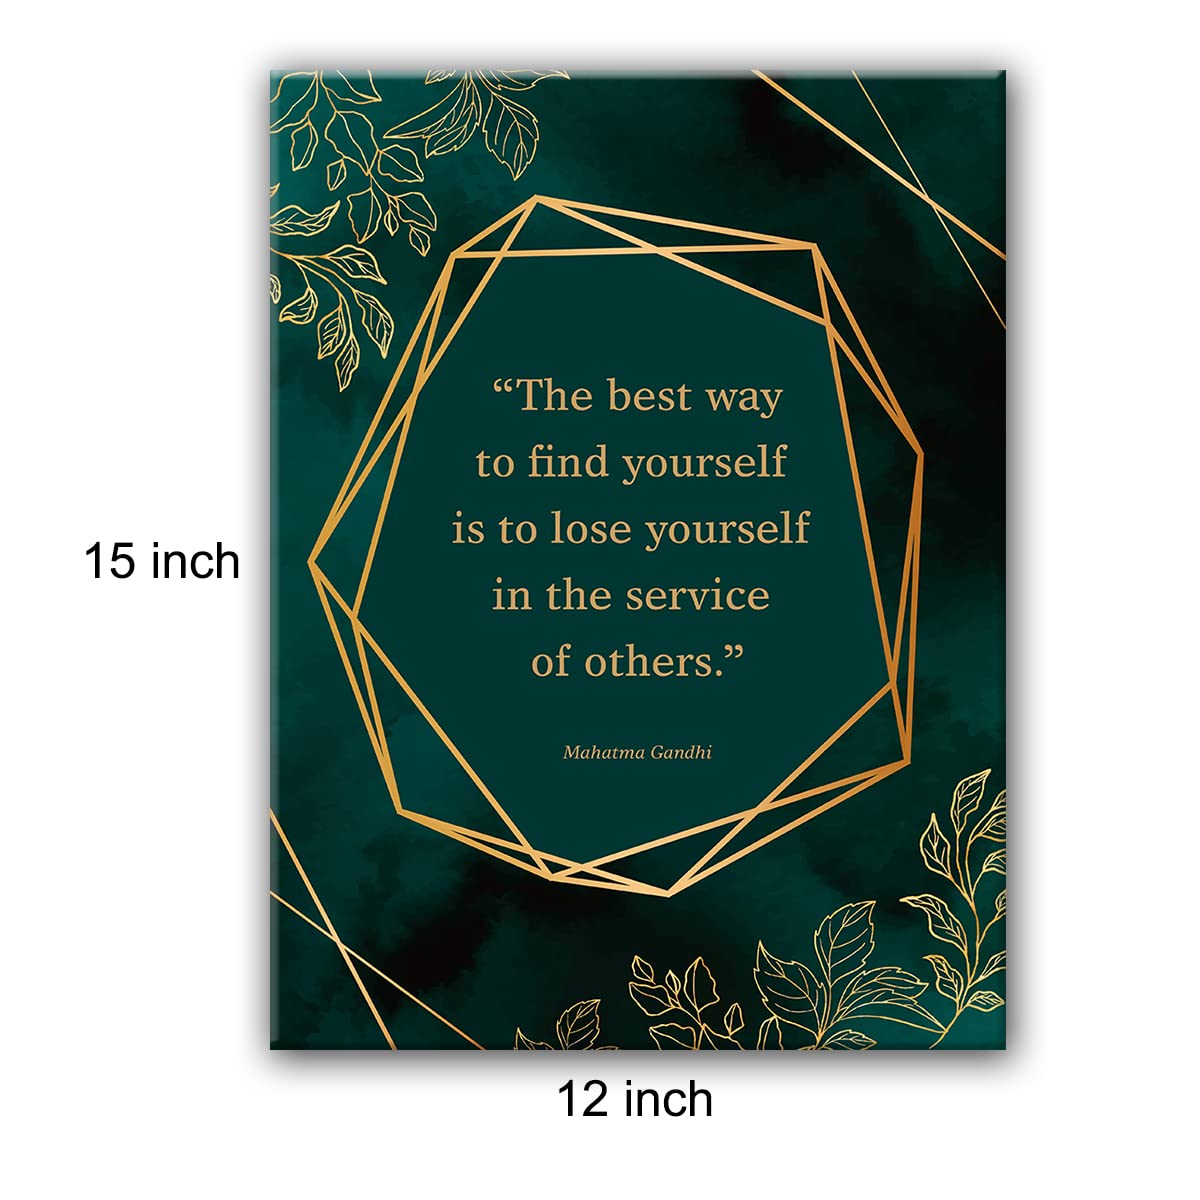 Yuzi-n Inspirational Quote Social Worker Print Poster Painting Canvas Wall Art & Tabletop Decoration Home Office Botanical Artwork, Therapist Gift 12x15Inch